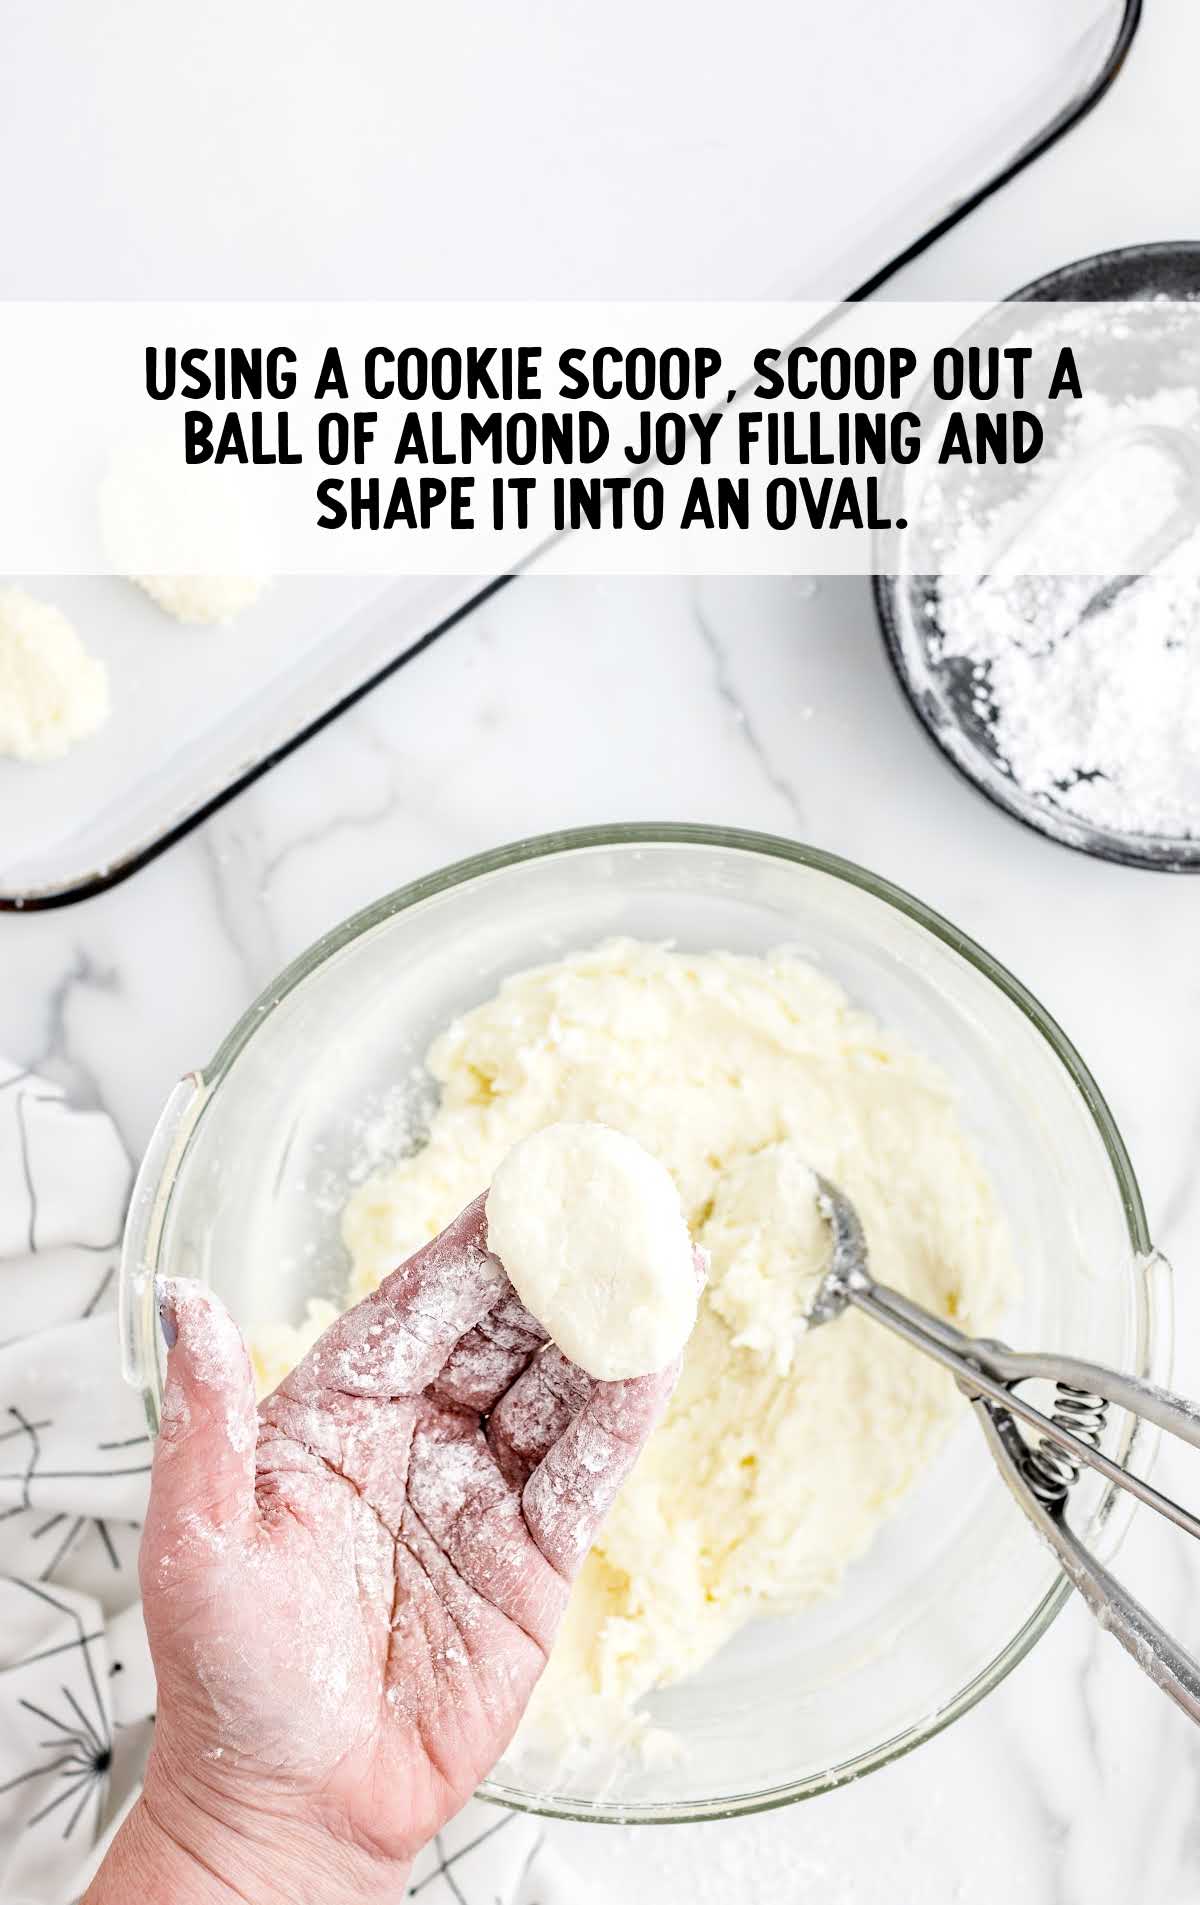 scoop out almond joy filling and shape it into an oval